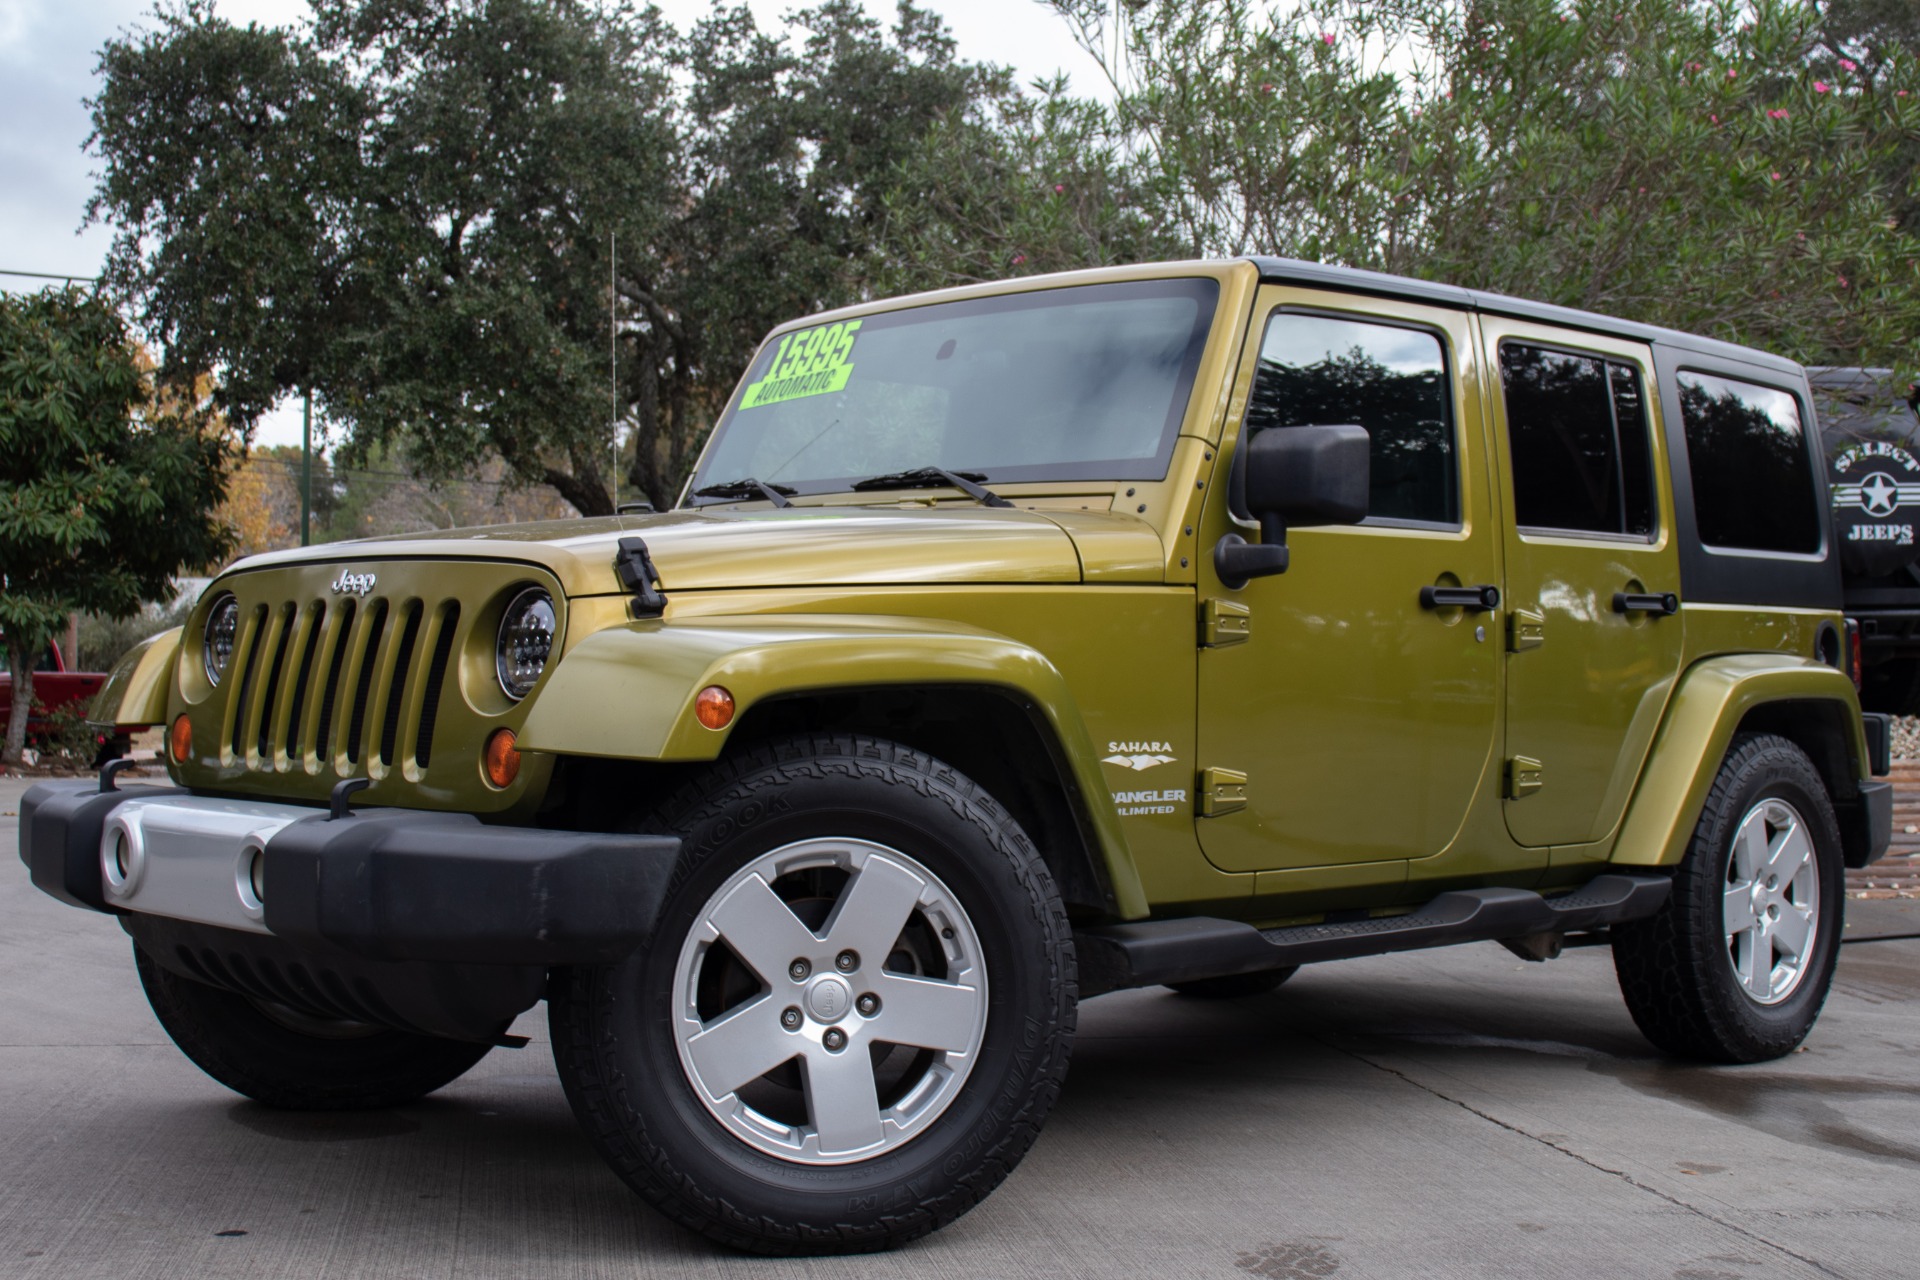 Used 2007 Jeep Wrangler Unlimited Sahara For Sale ($15,995) | Select Jeeps  Inc. Stock #139894